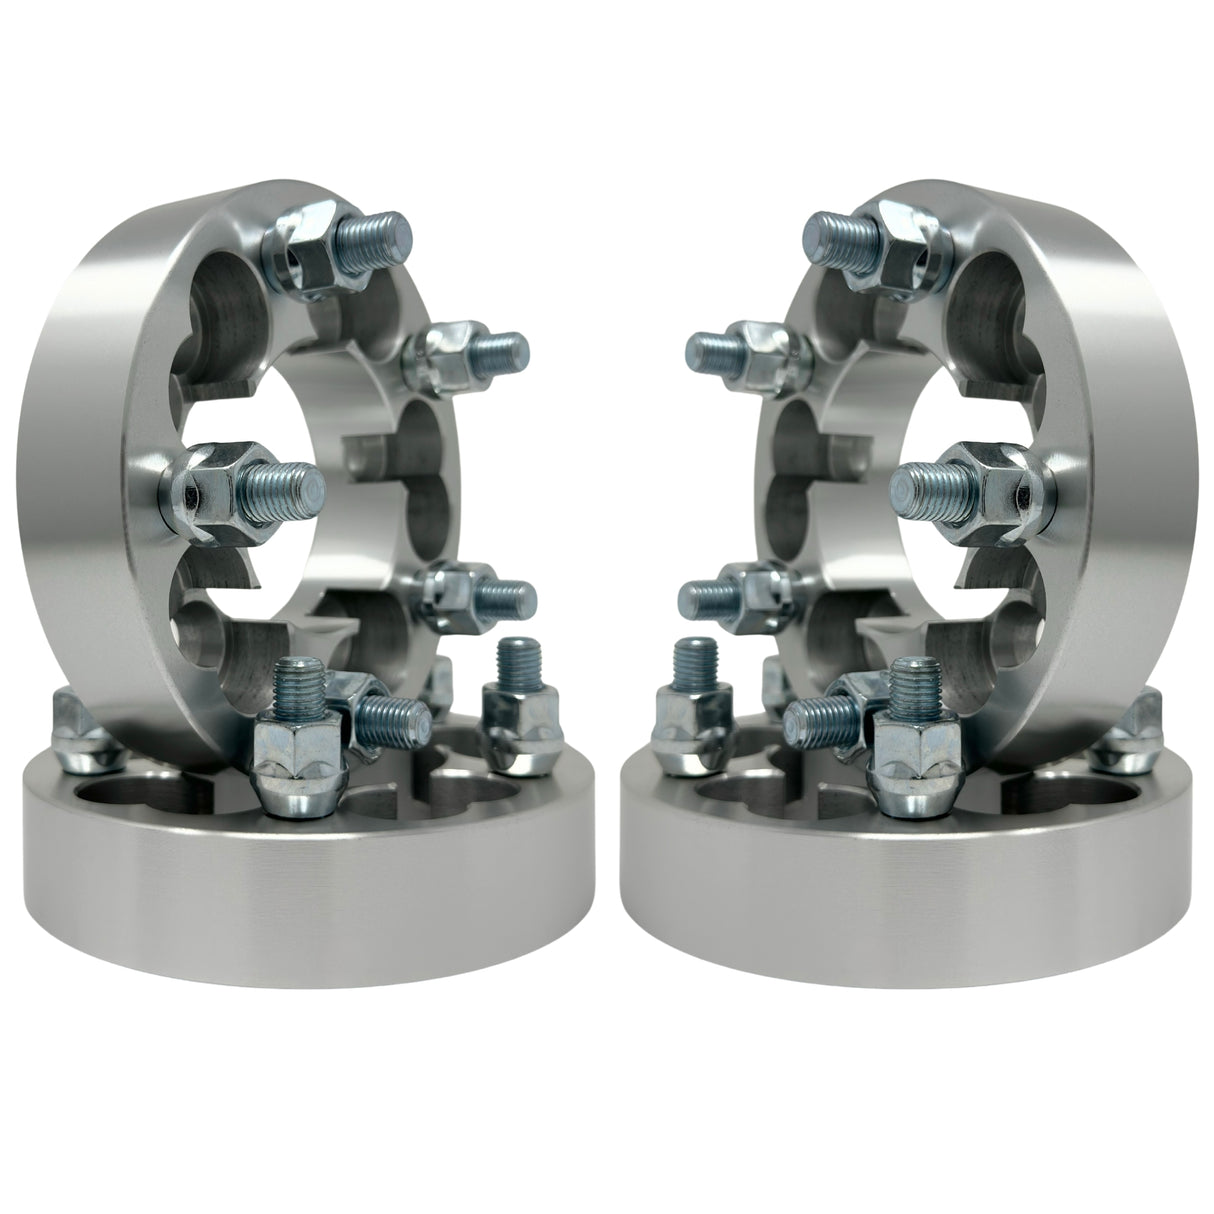 5x114.3 or 5x120.7 to 5x112 Wheel Adapters Universal Kit 1.25" Inch (32mm) 12x1.5 Studs & Lug Nuts 74mm Center Bore | 5x4.5 or 5x4.75 to 5x112